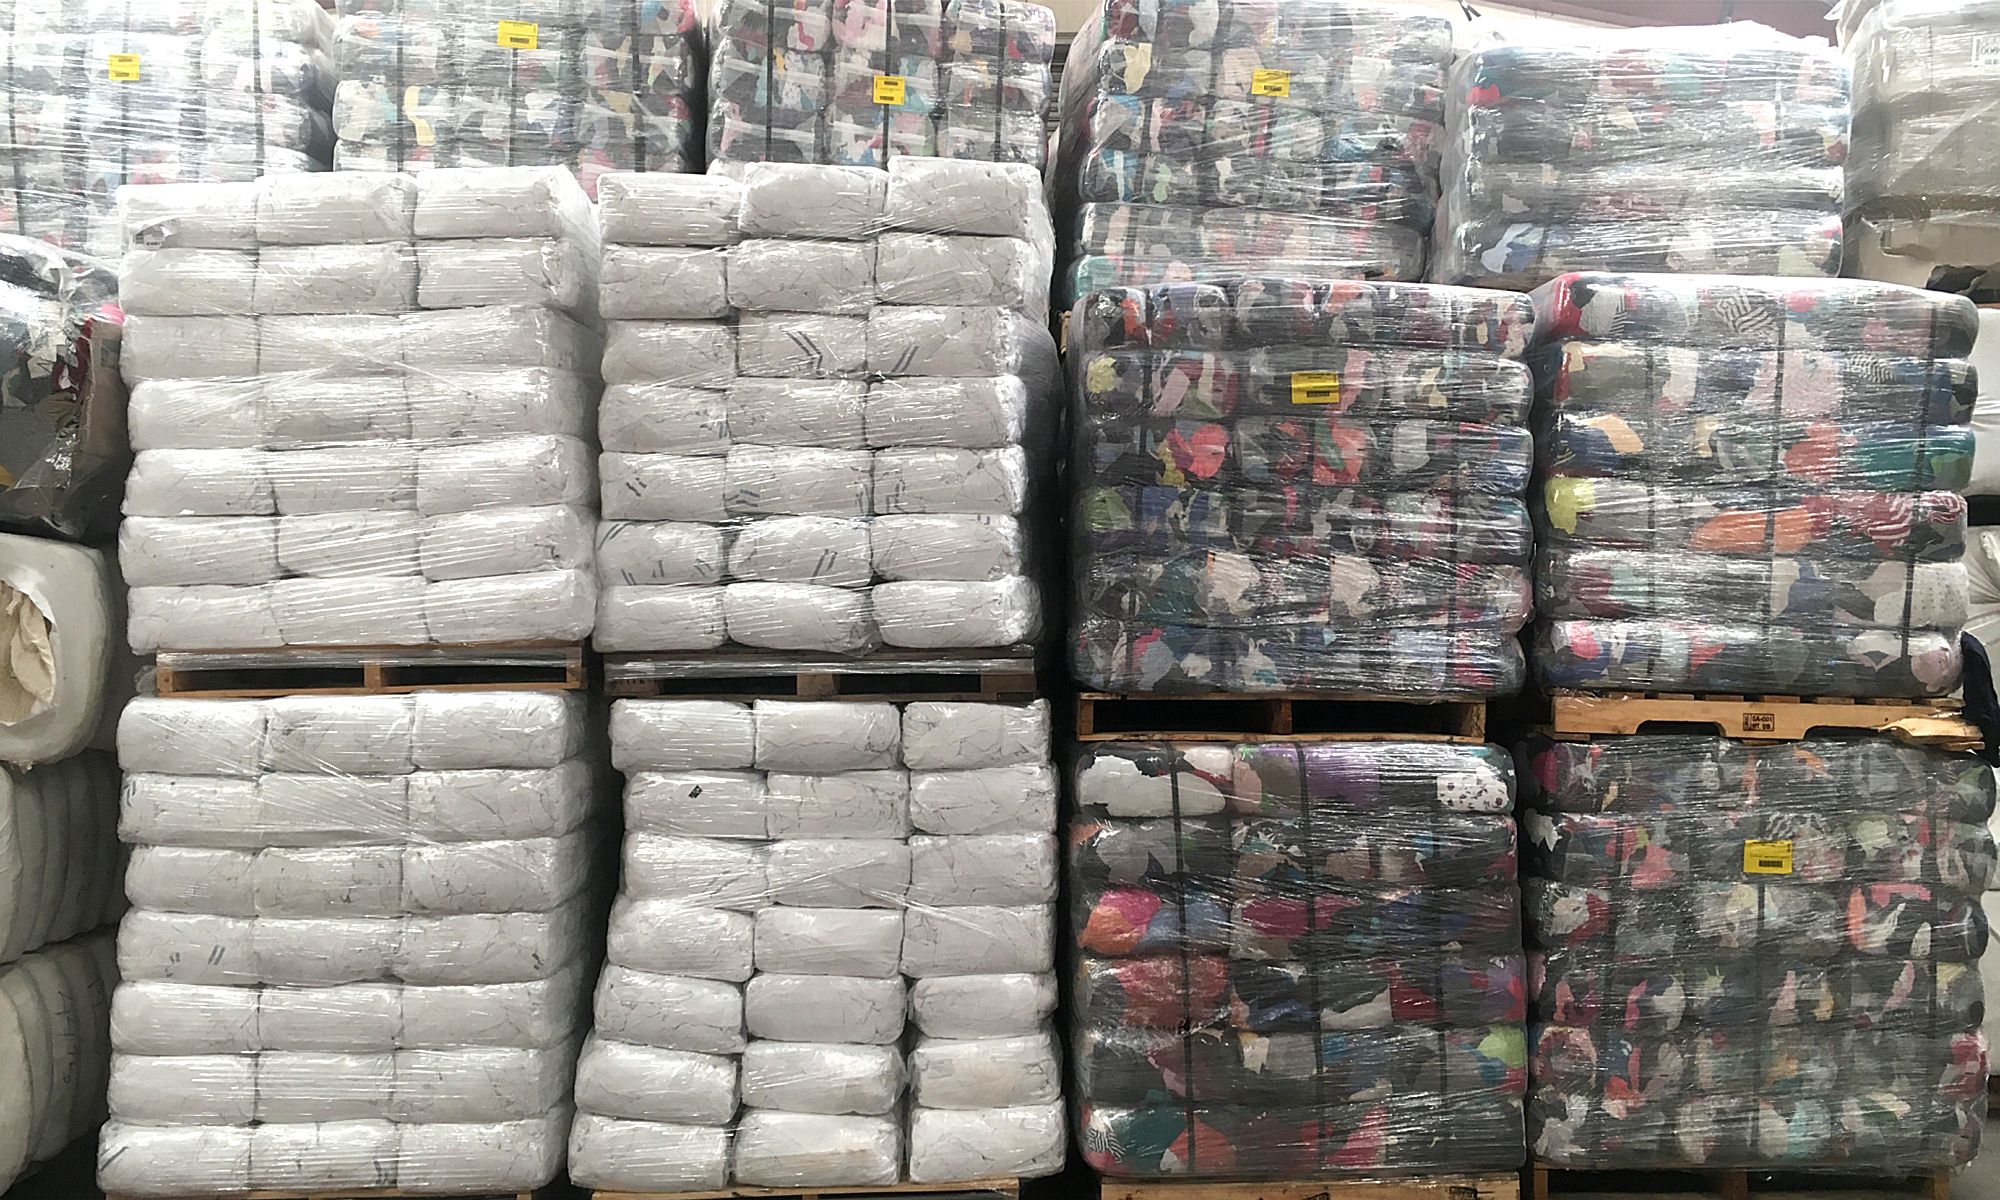 terry towelling, non-fluff cloths and coloured rags in the warehouse at KKC, Janitorial Supplies &  Health & Safety Products, Co. Kildare, Ireland